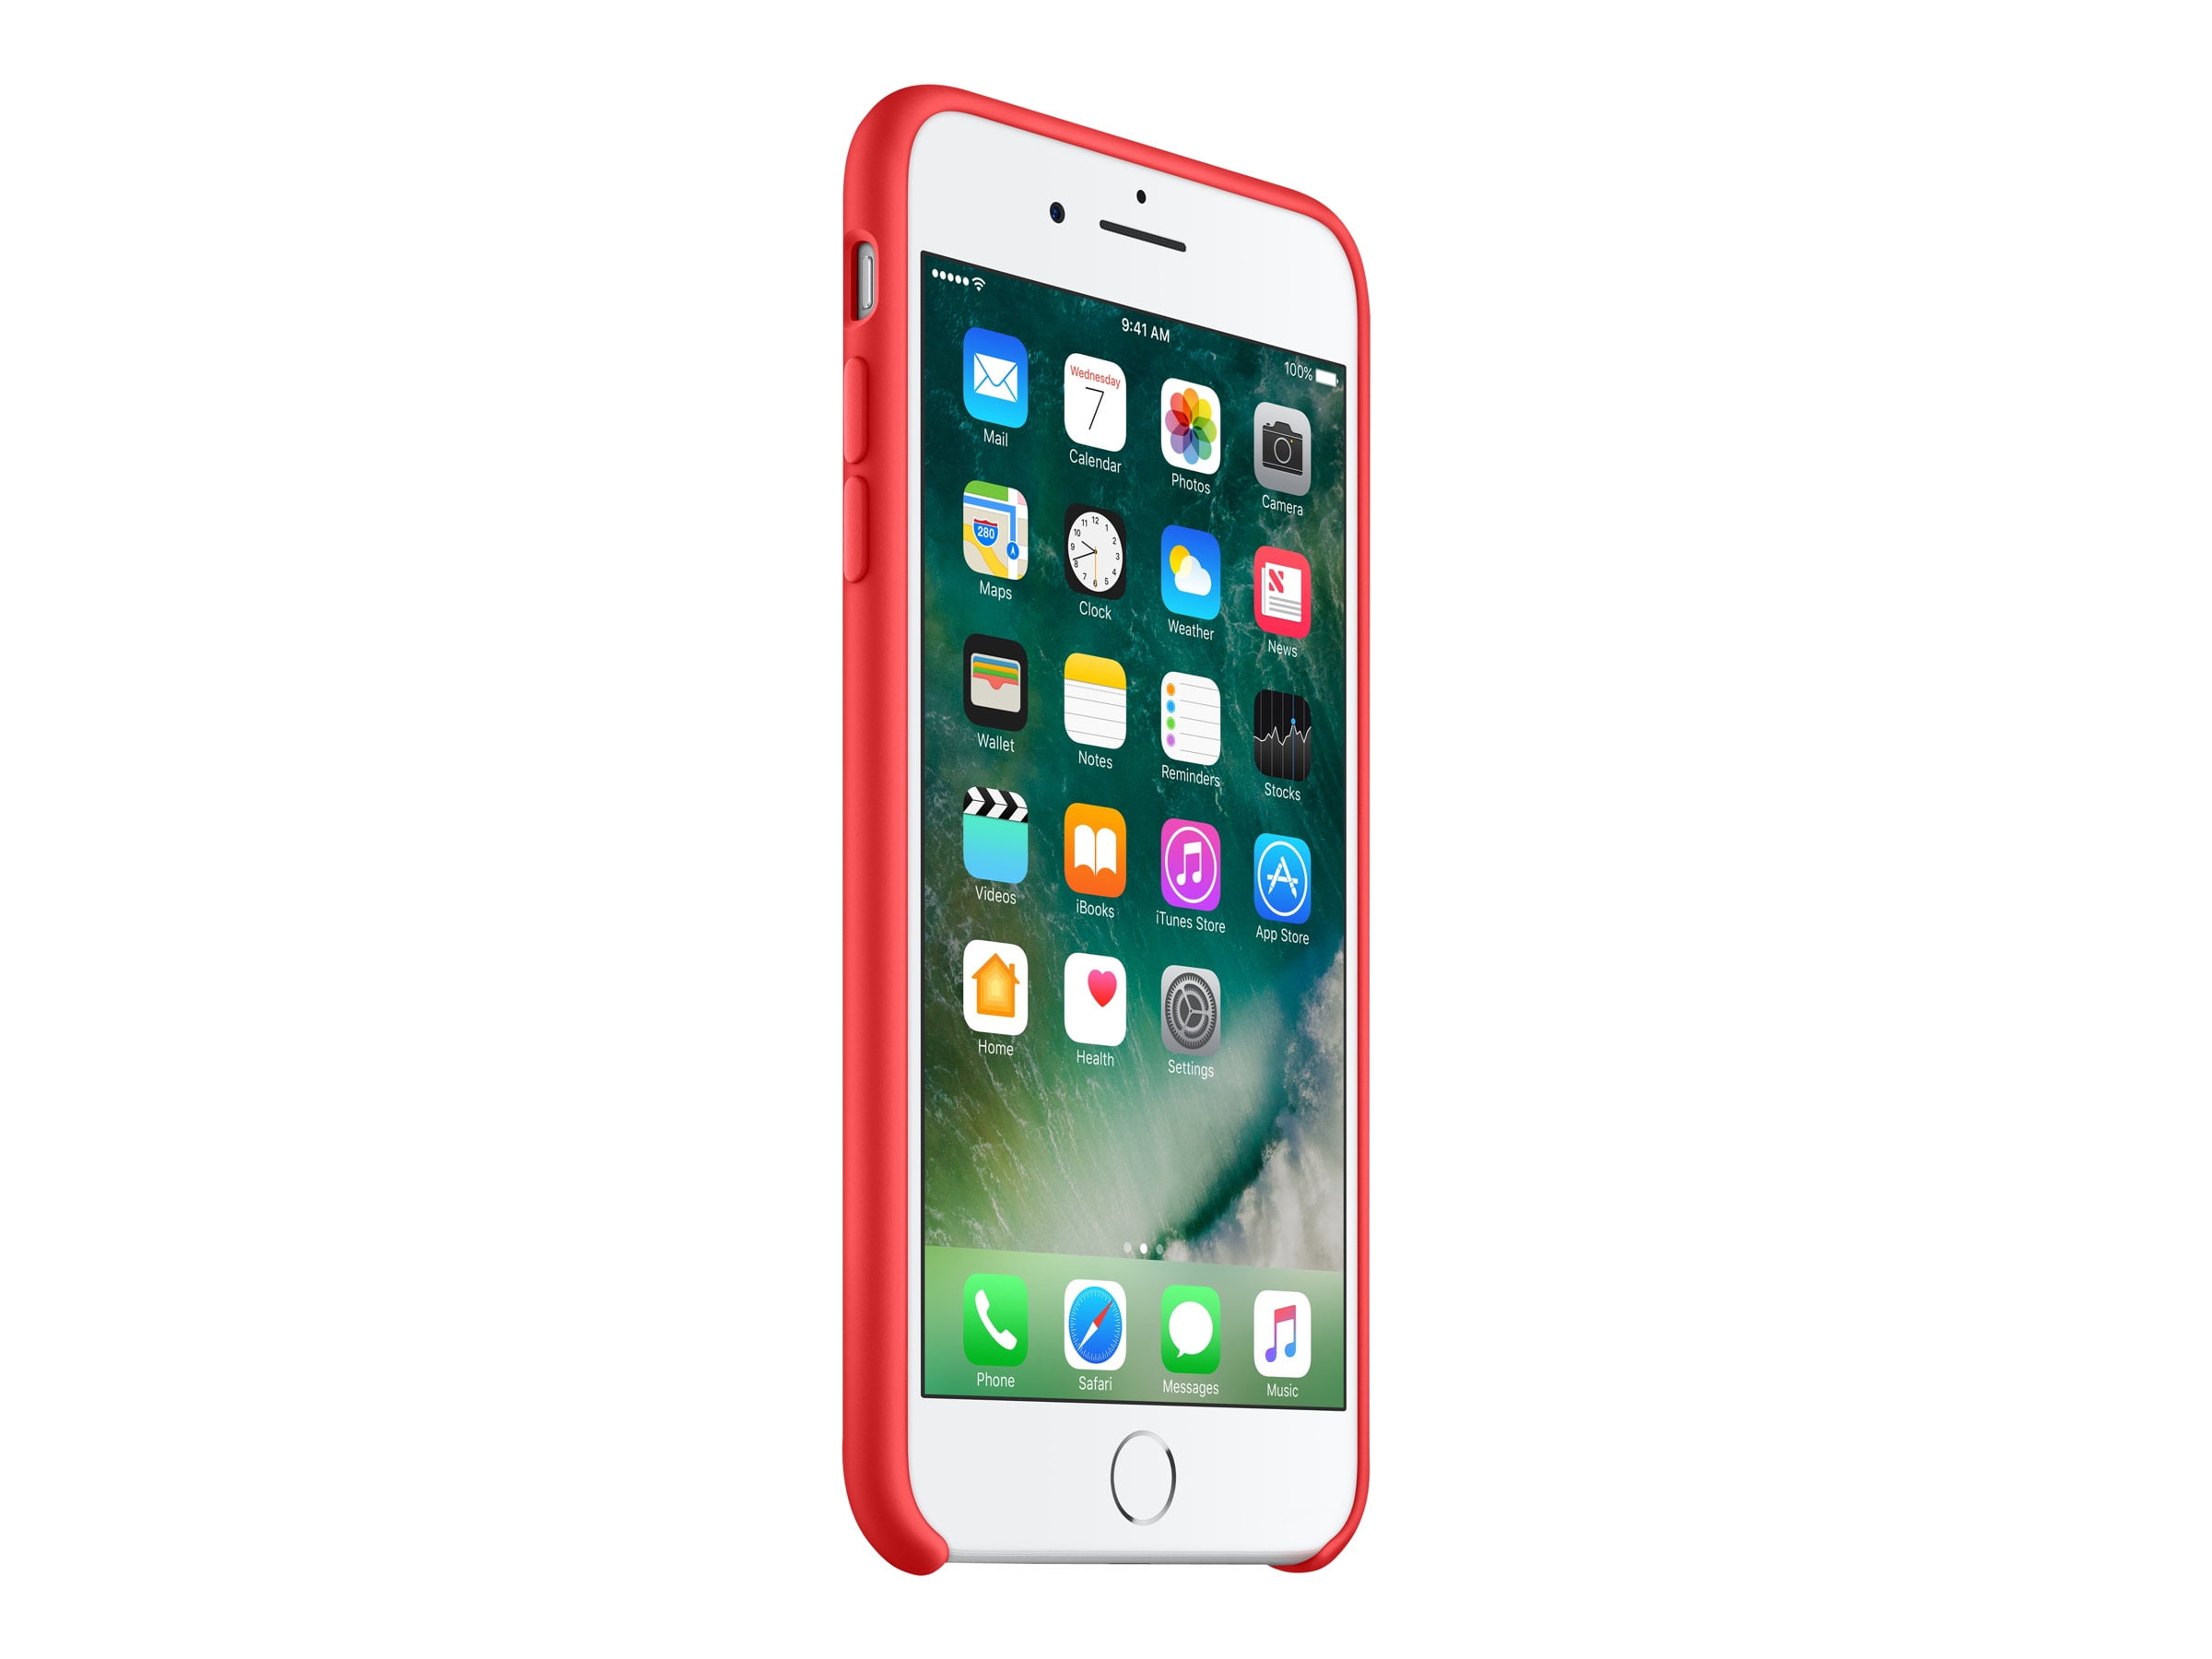 Apple iPhone 7 Plus Silicone Case ((PRODUCT)RED) MMQV2ZM/A B&H